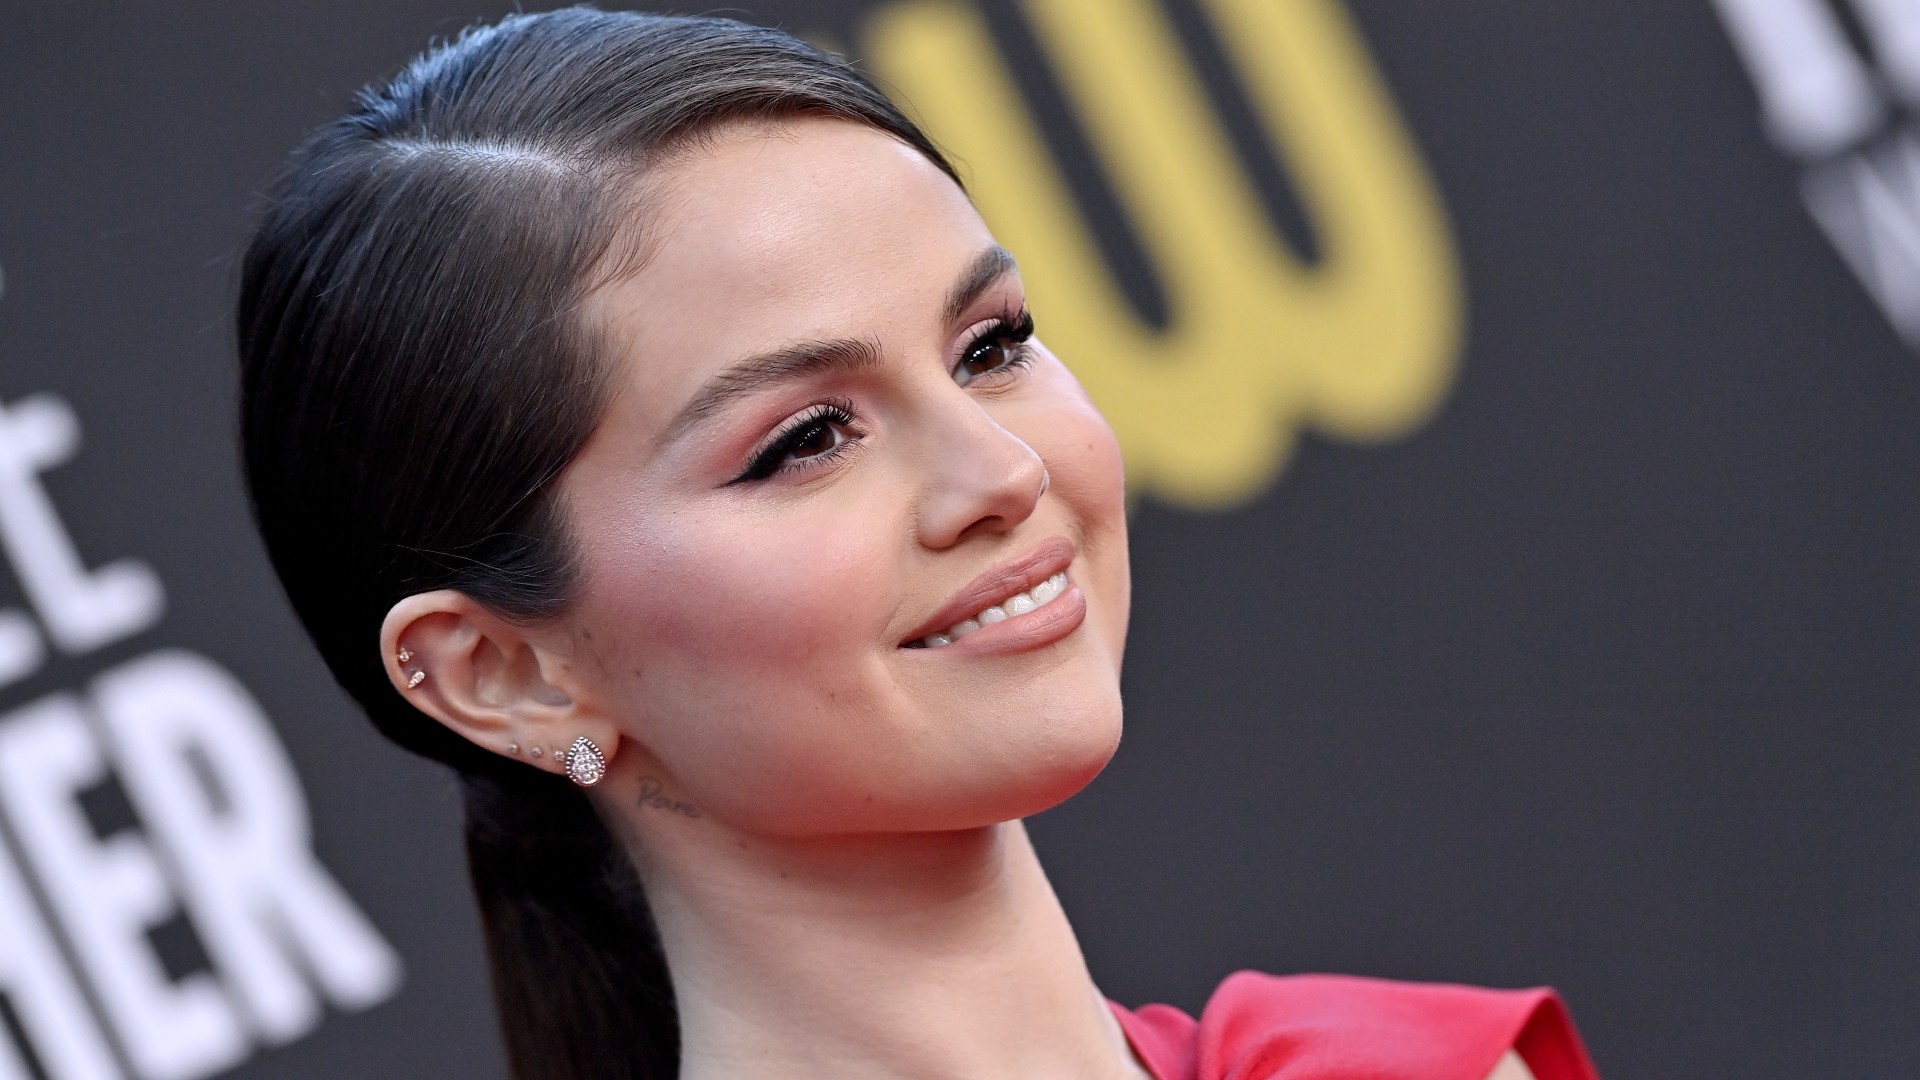 Selena Gomez Shared Gorgeous Makeup-Free Selfies Feat. Her Natural Curls